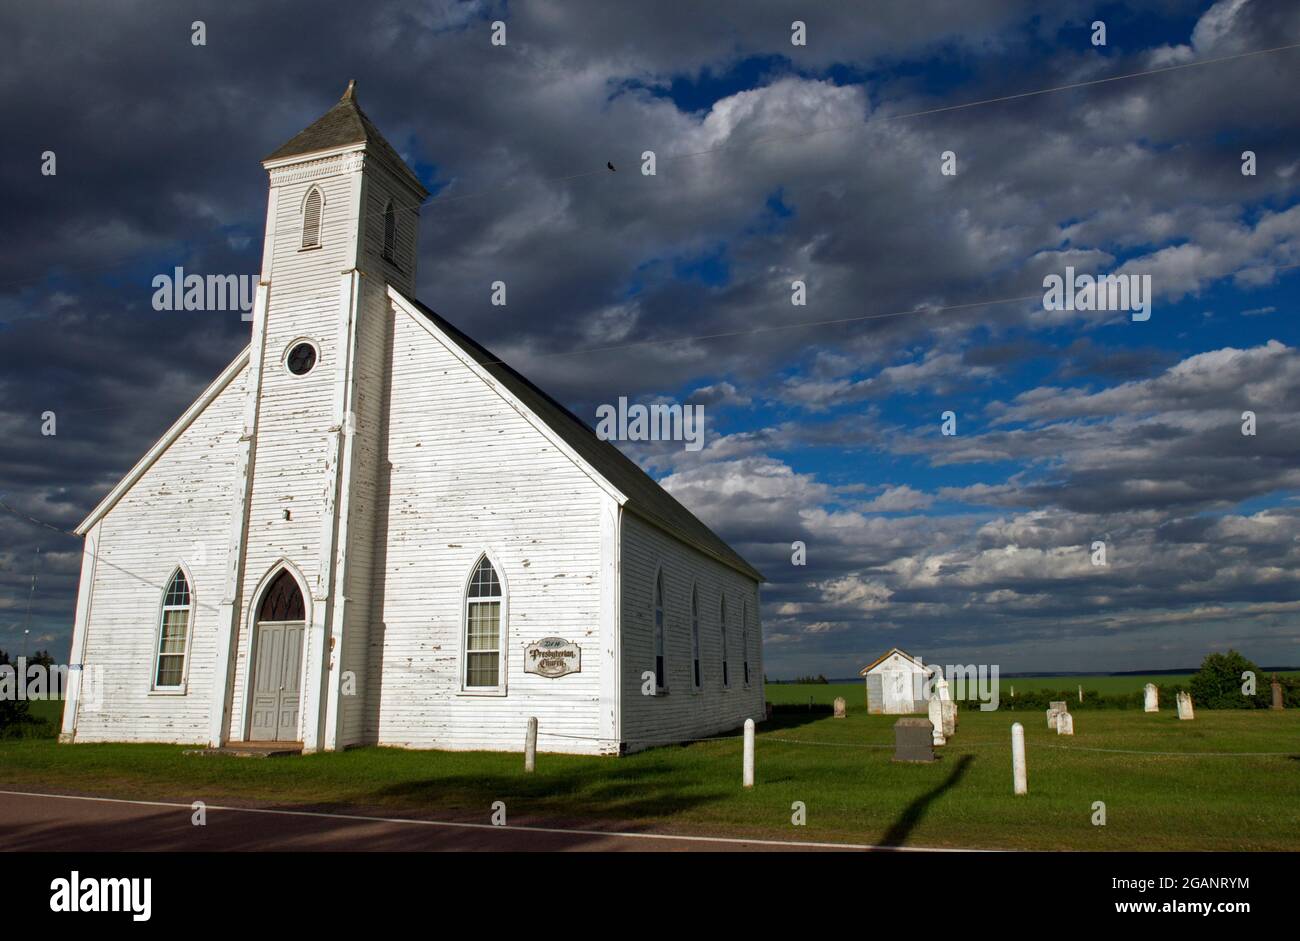 The historic Lot 14 Presbyterian Church and cemetery at Birch Hill, Prince Edward Island. The church dates to the late 1850s. Stock Photo